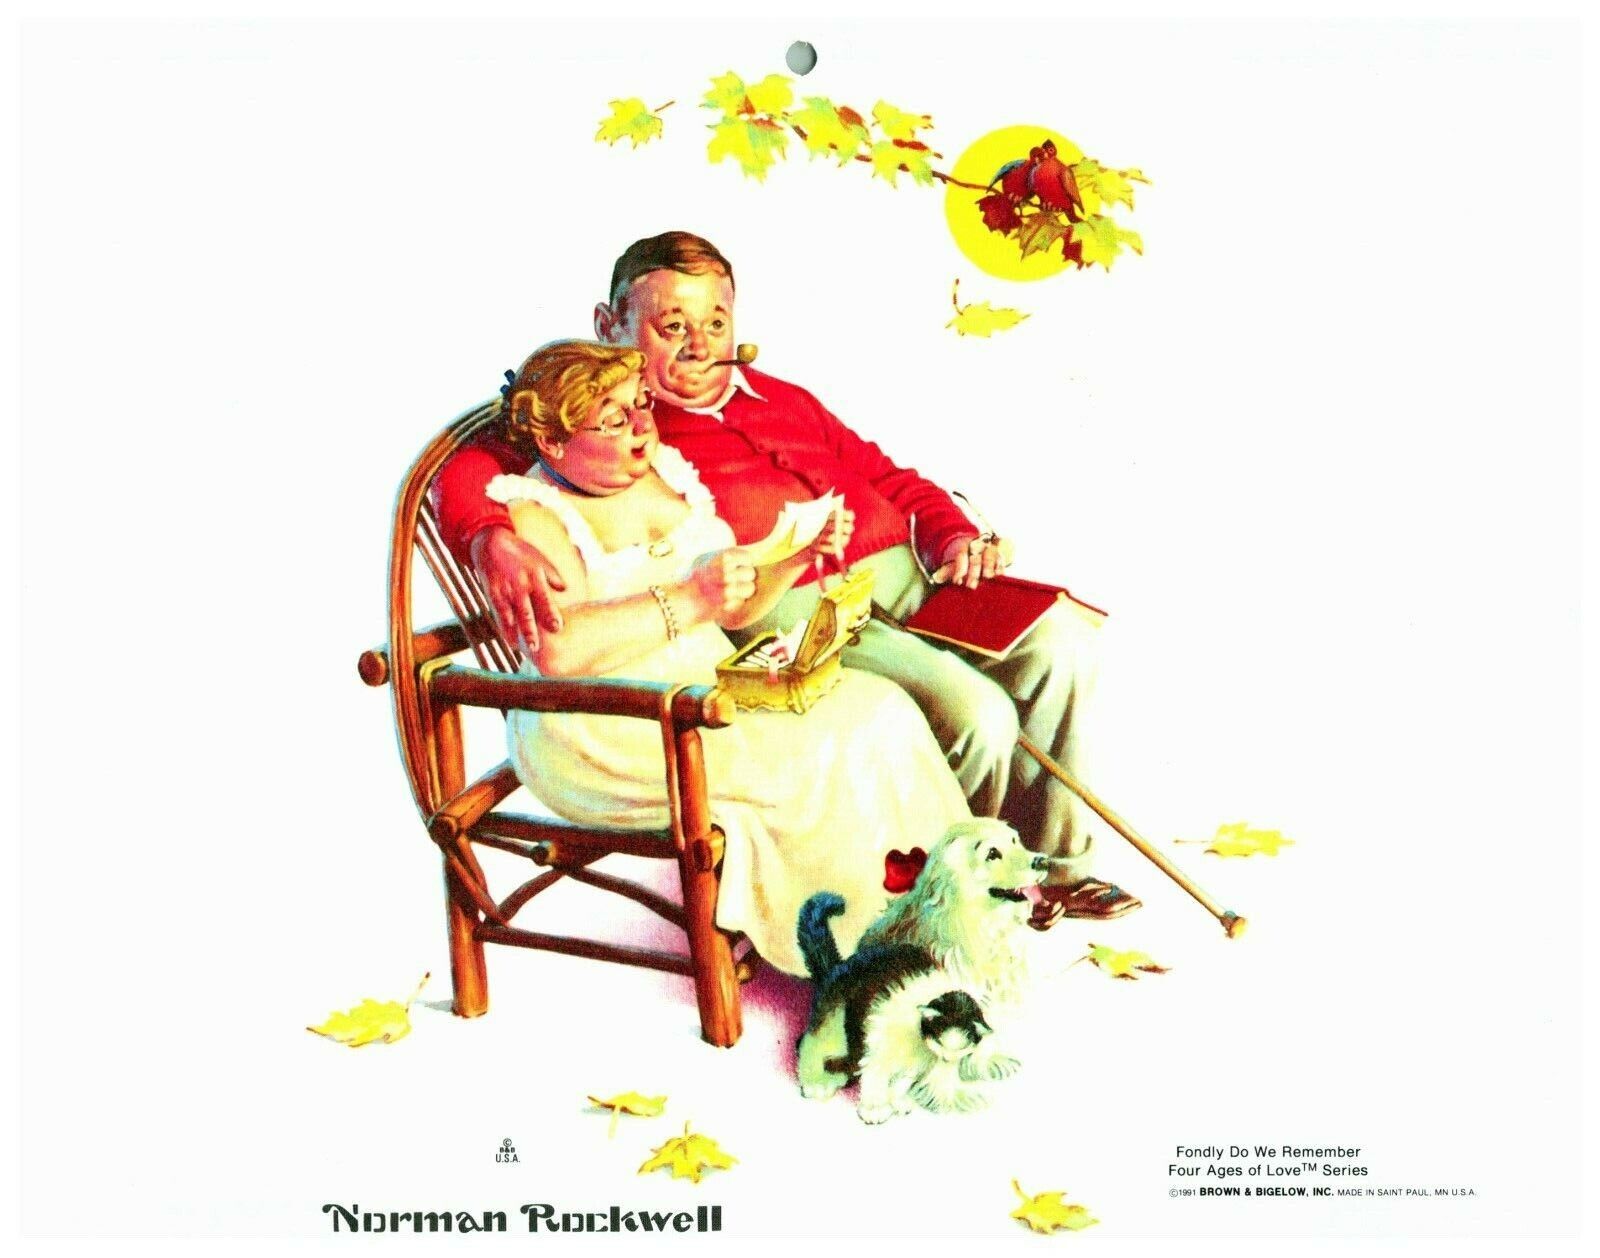 Fondly Do We Remember Four Ages of Love Series 1991 Norman Rockwell Calendar